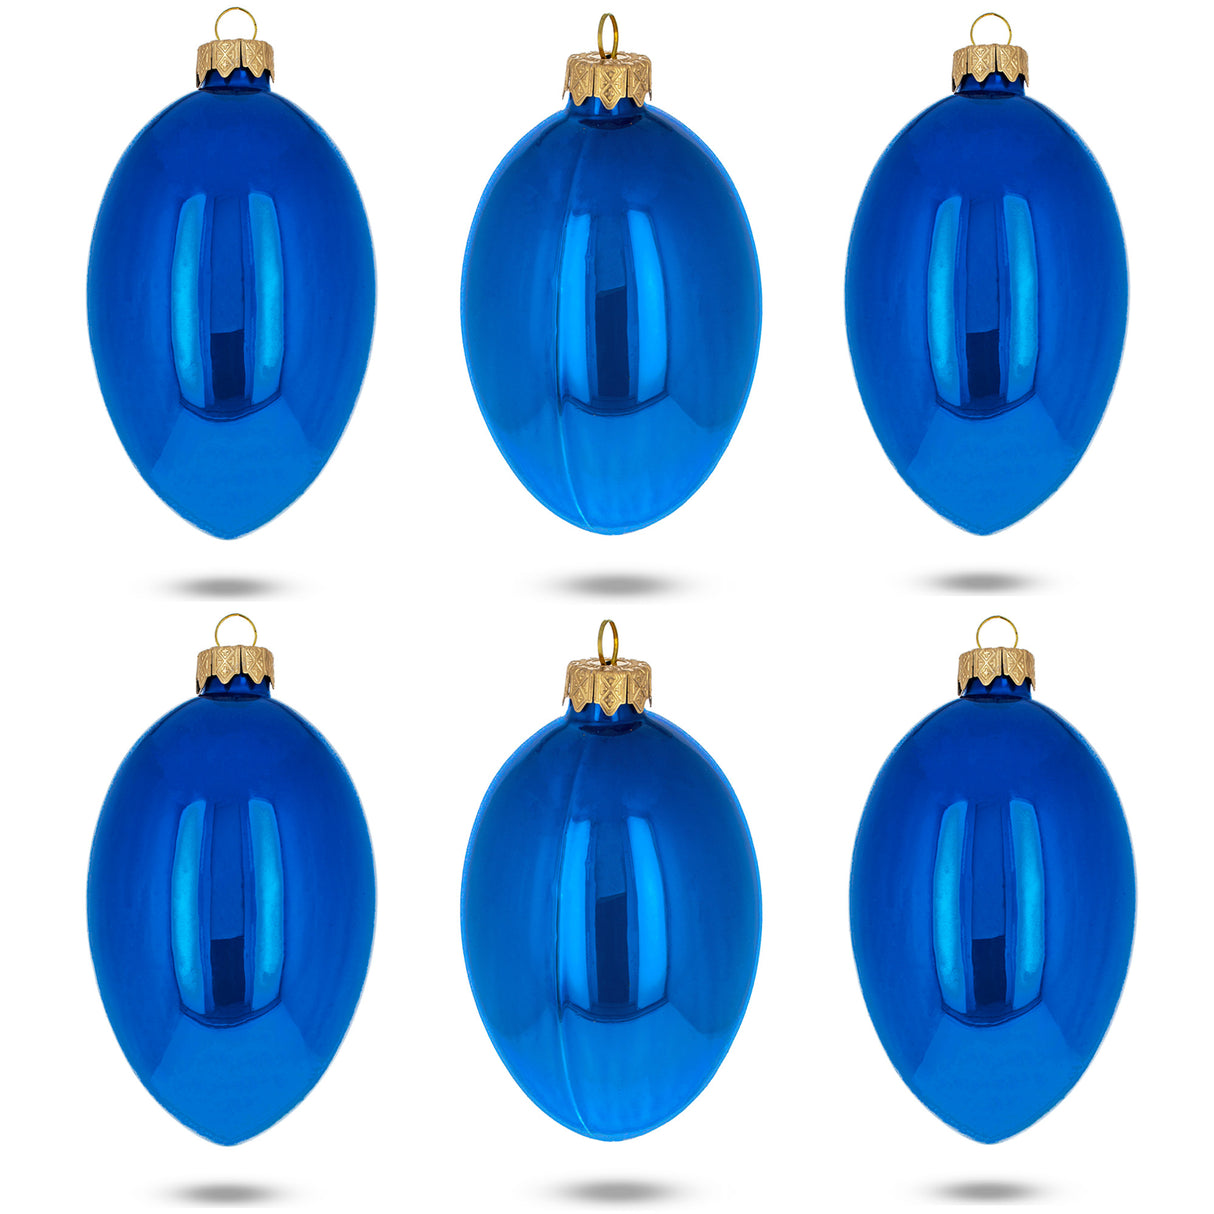 Set of 6 Blue Glossy Glass Egg Ornaments 4 Inches in Blue color, Oval shape